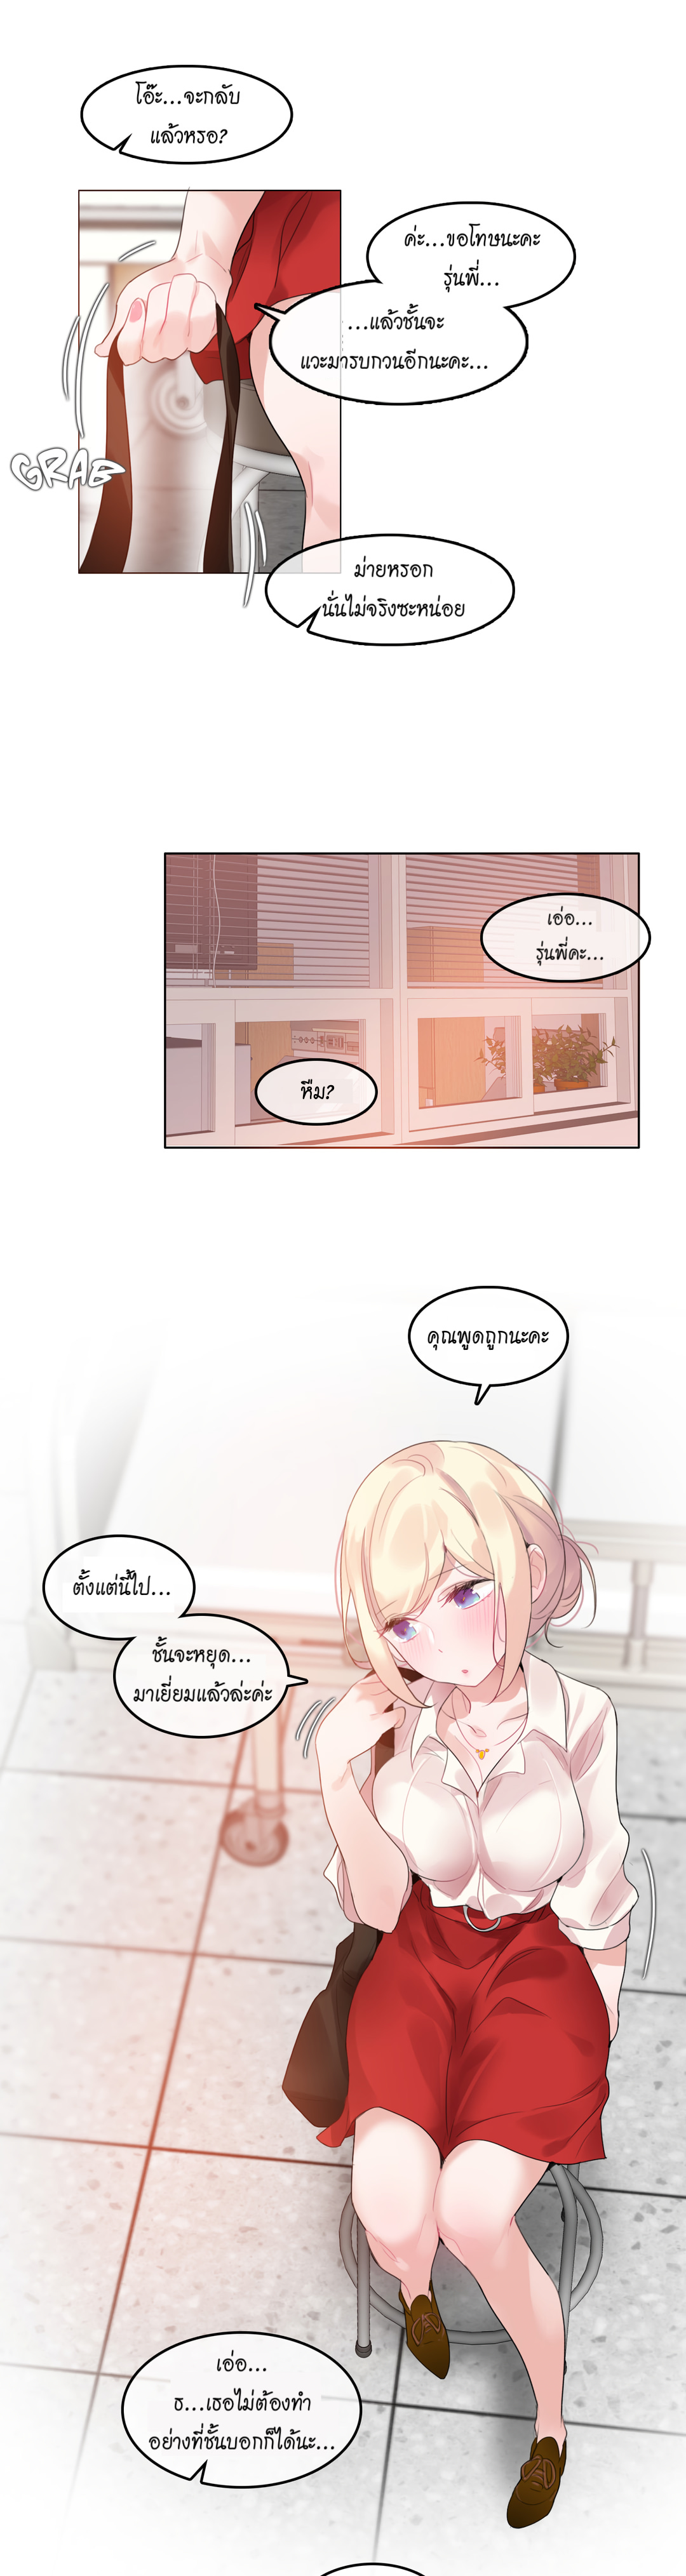 A Pervert’s Daily Life 48 14